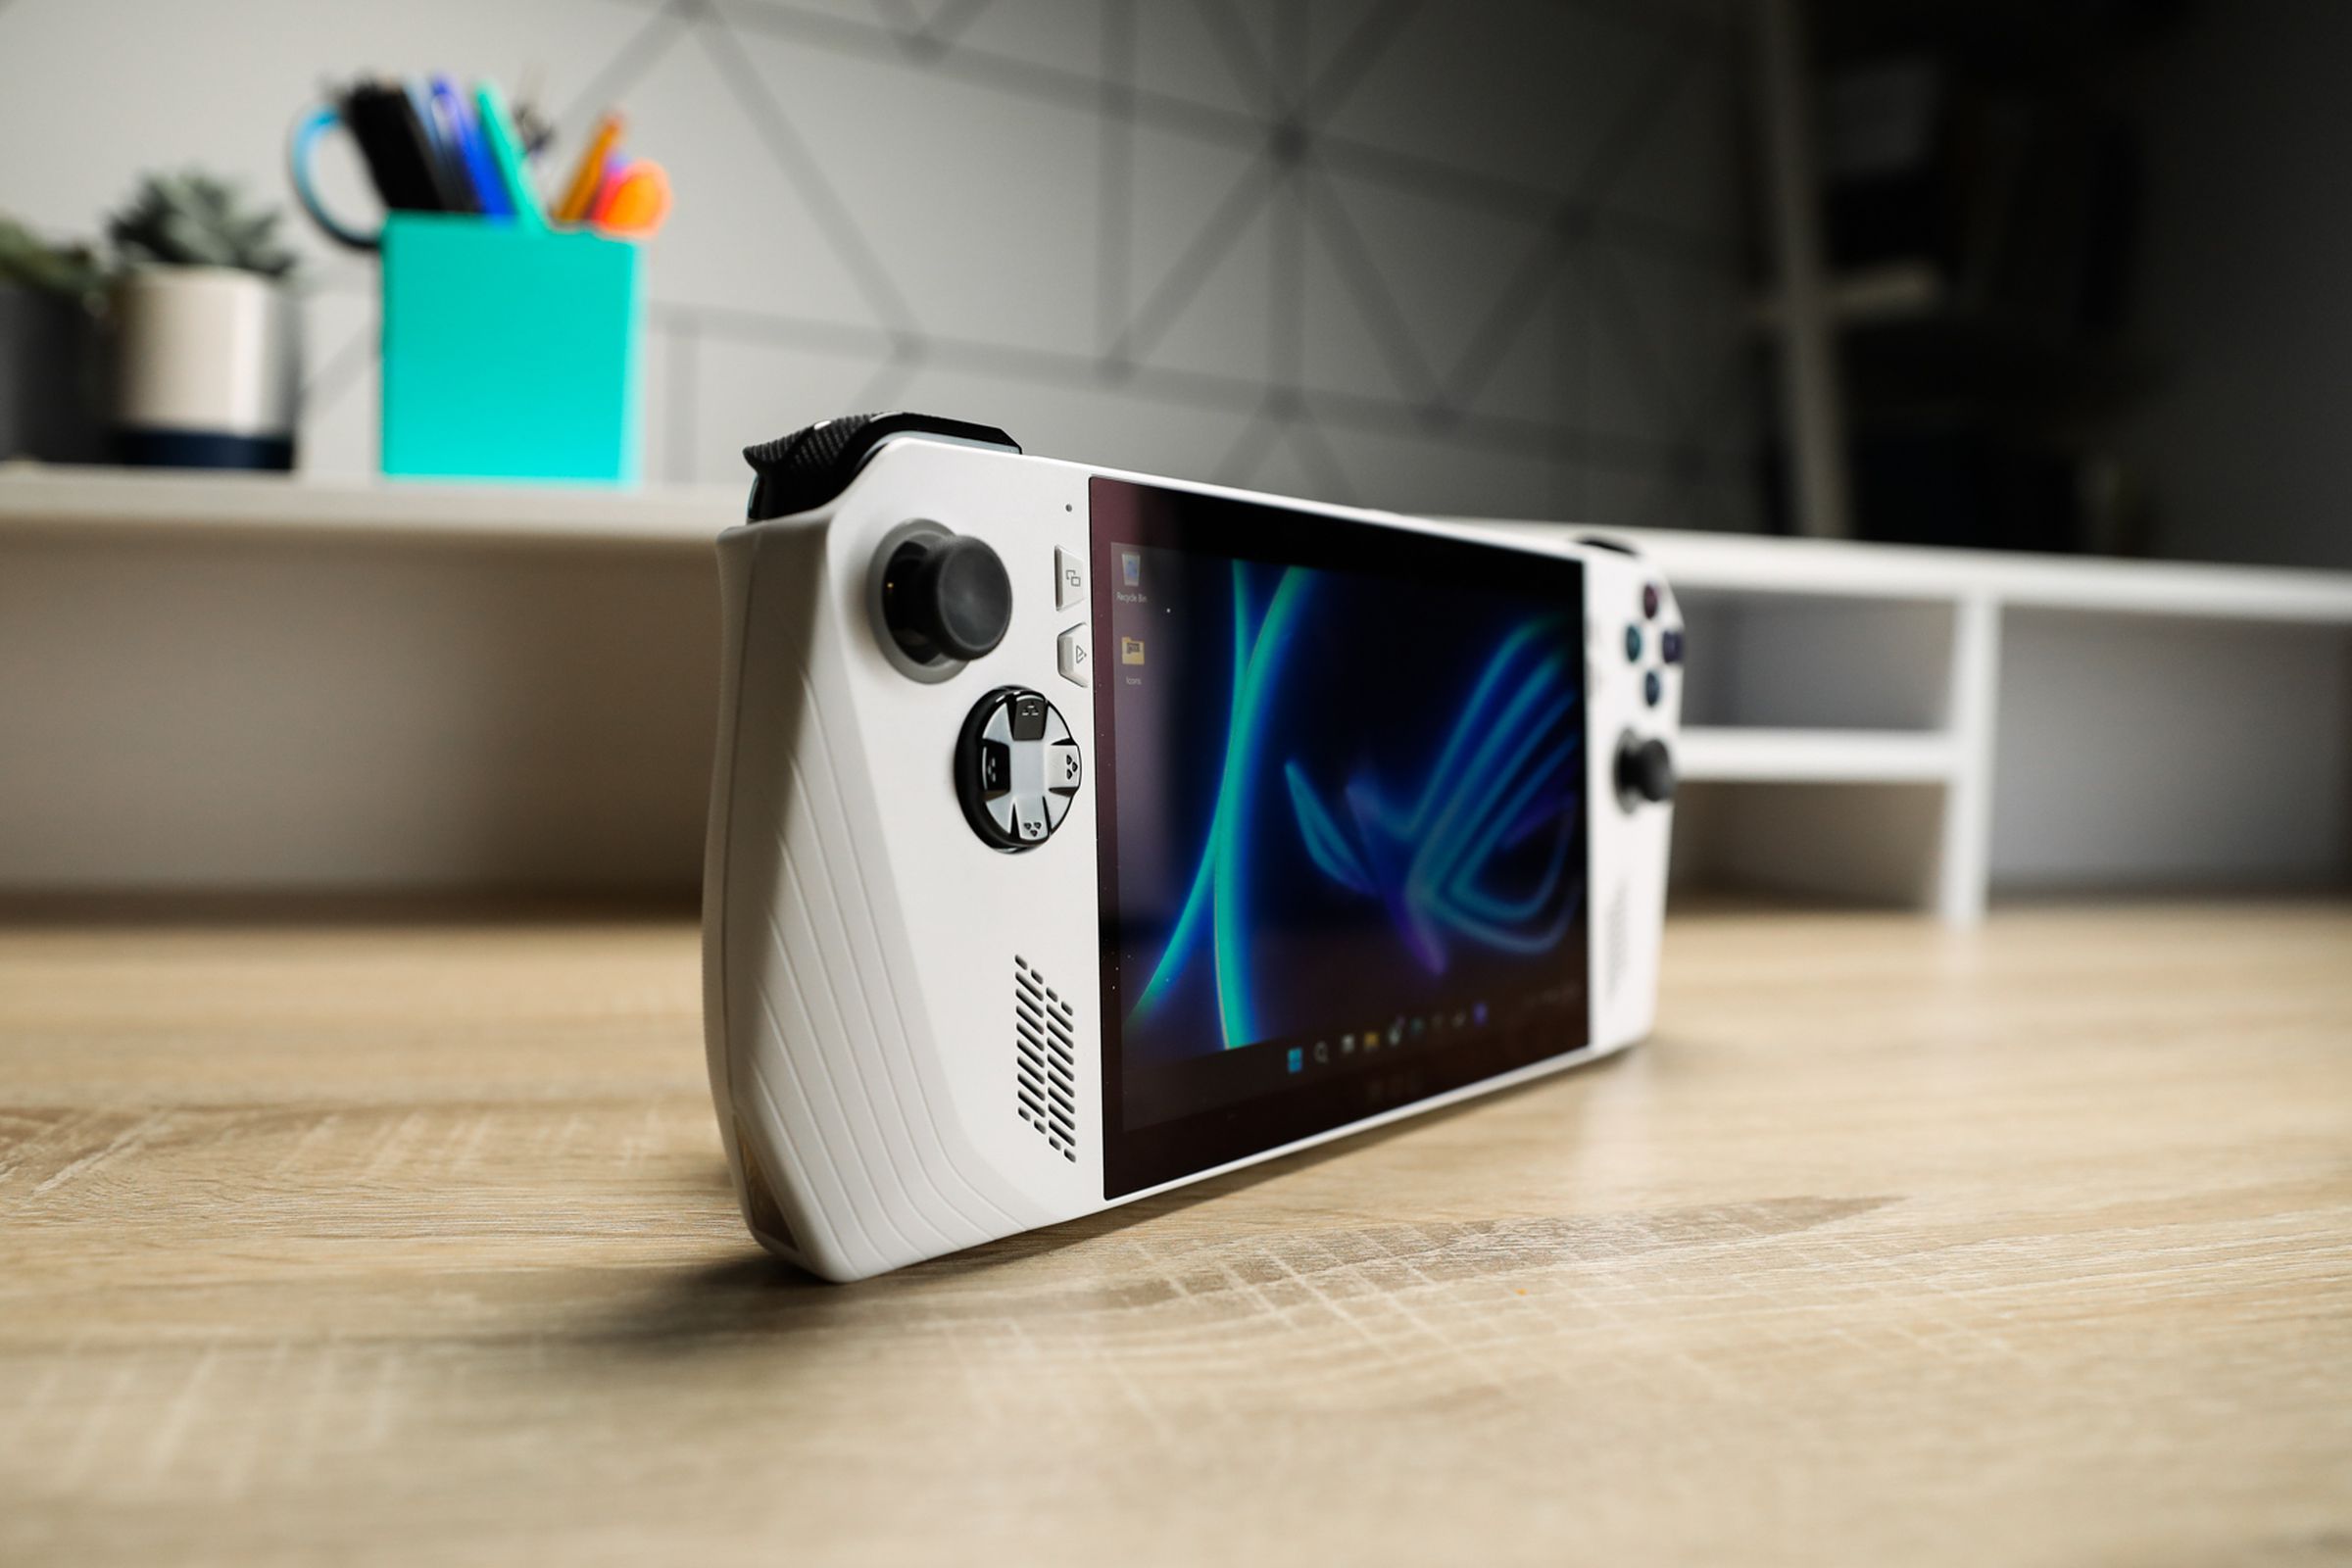 A white handheld with black joysticks and buttons sitting on a wooden desk with shallow depth of focus, at an angle to accentuate its profile.